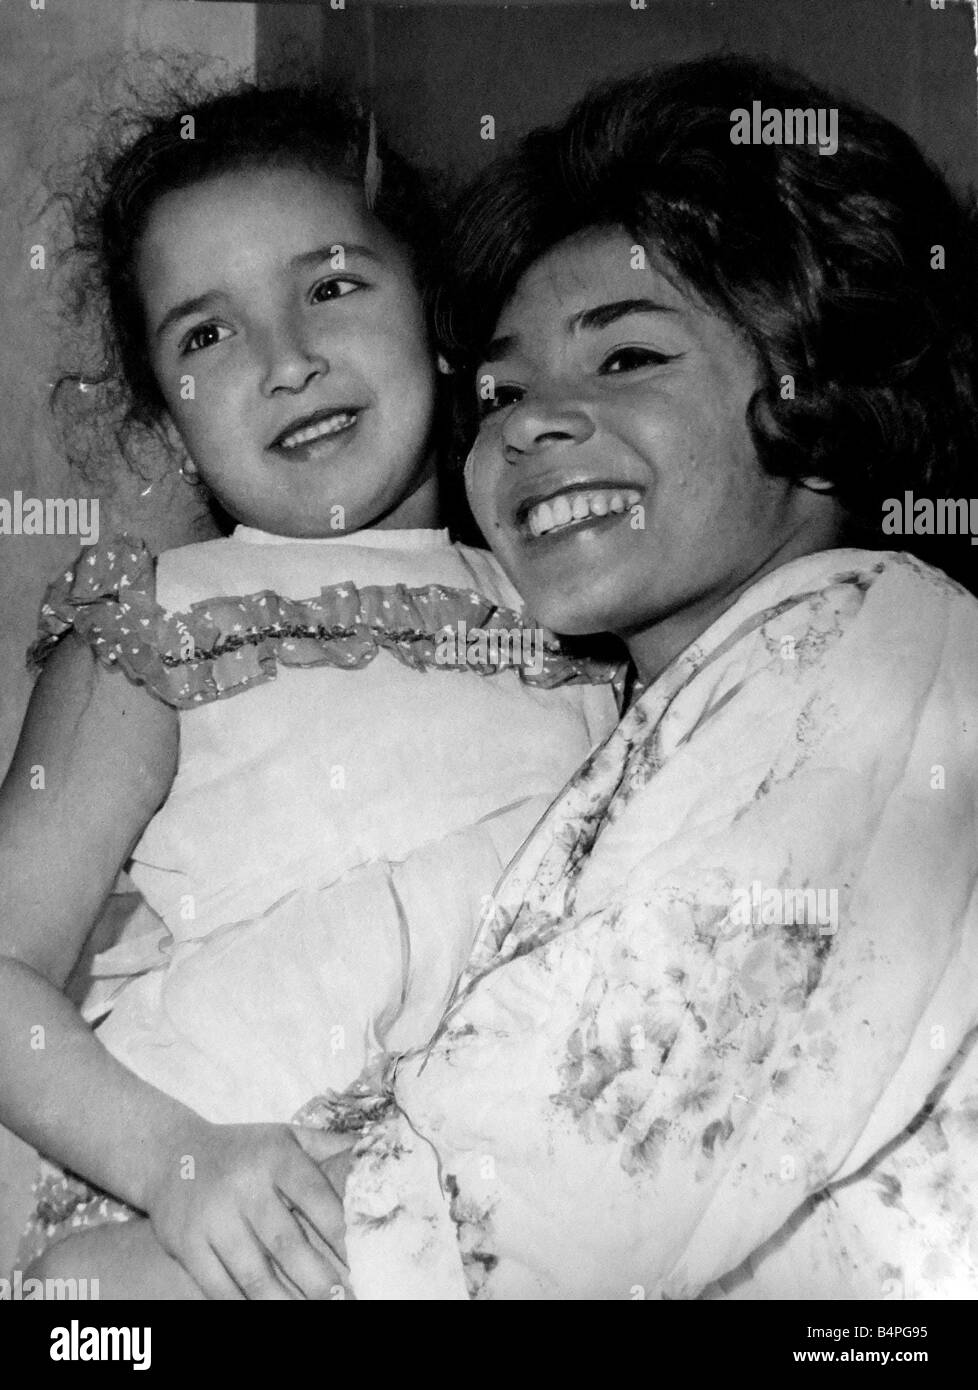 Shirley Bassey the Cardiff born singer returned home to Cardiff for a one night show at the Sophia Gardens Pavilion Picture shows Shirley once a proud member of Butetown s Rainbow Club hugging six year old Marion Mohamed of Nelson Street Butetown after Marion presented her with a bouquet of flowers from Rainbow Club members 27th Nov 1961 Stock Photo